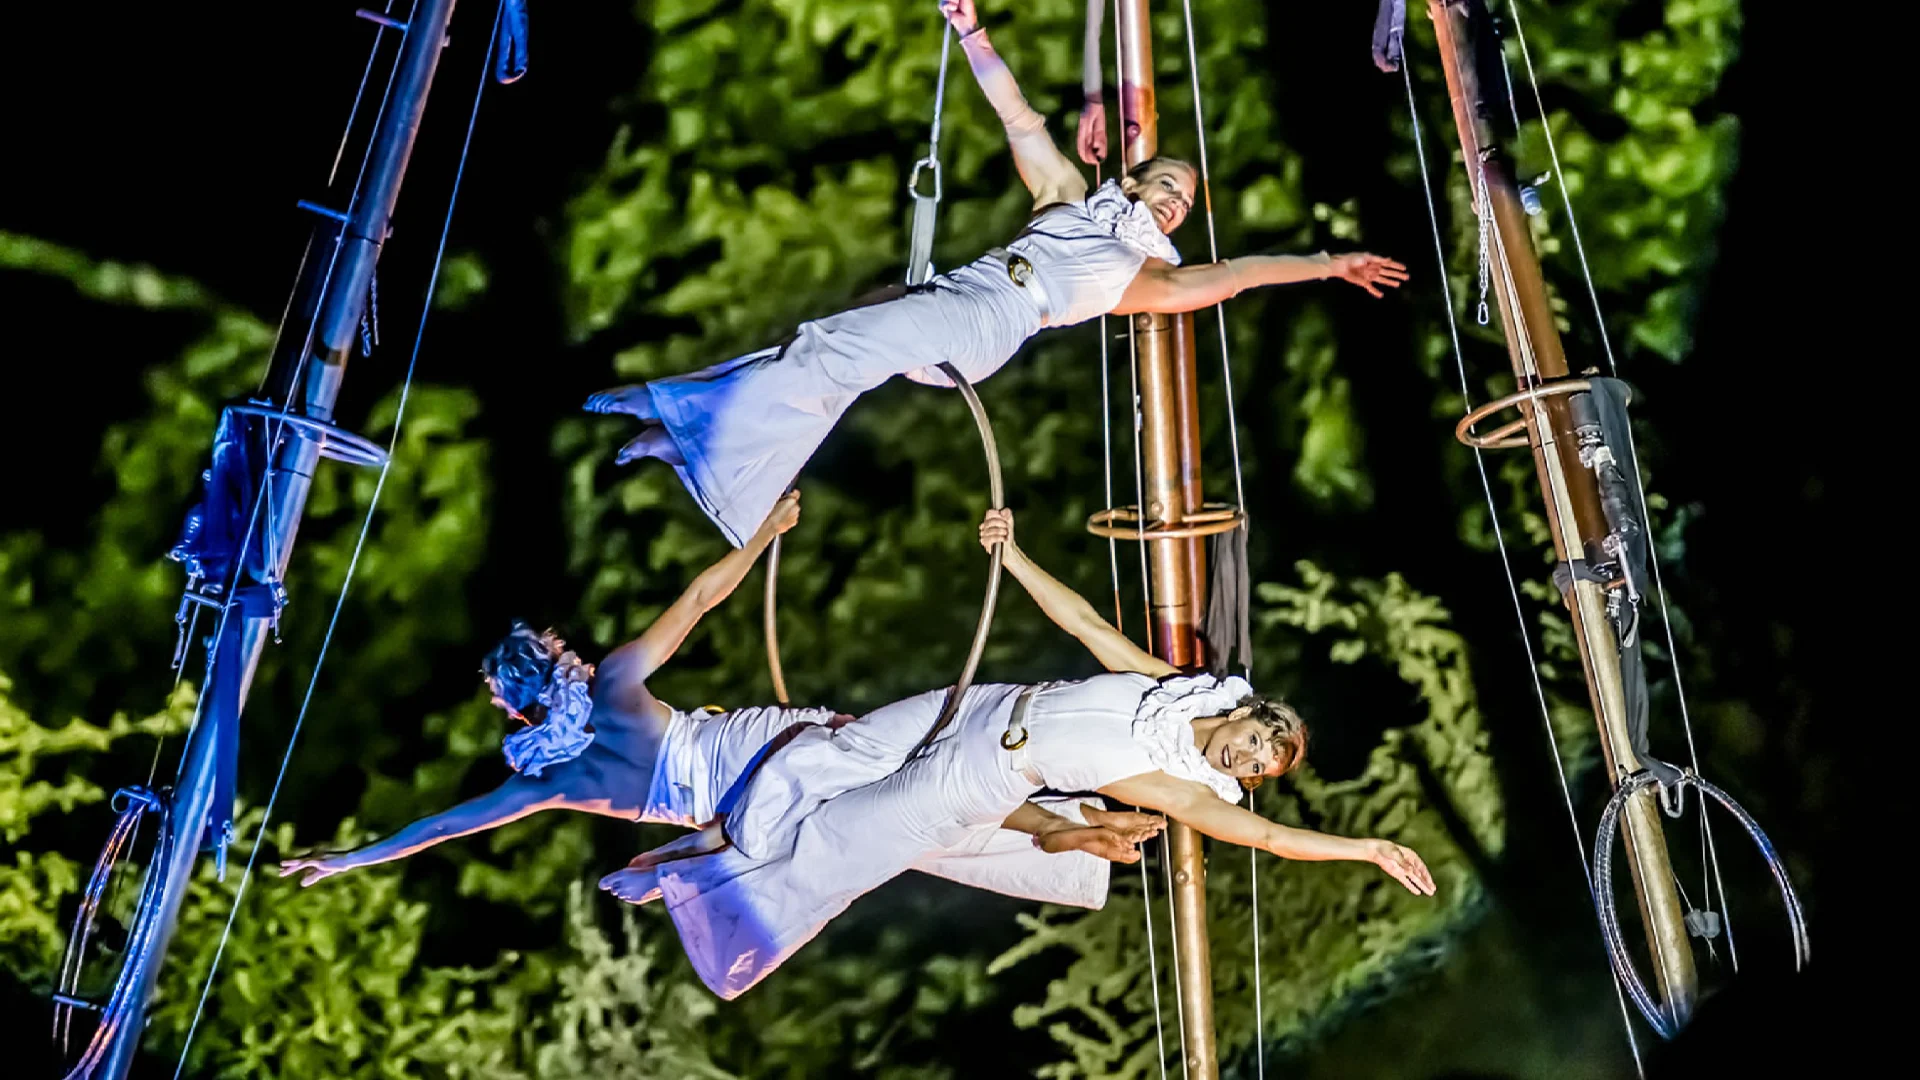 A picture shows acrobats at the Botanical Night in the Botanical Garden in Berlin.